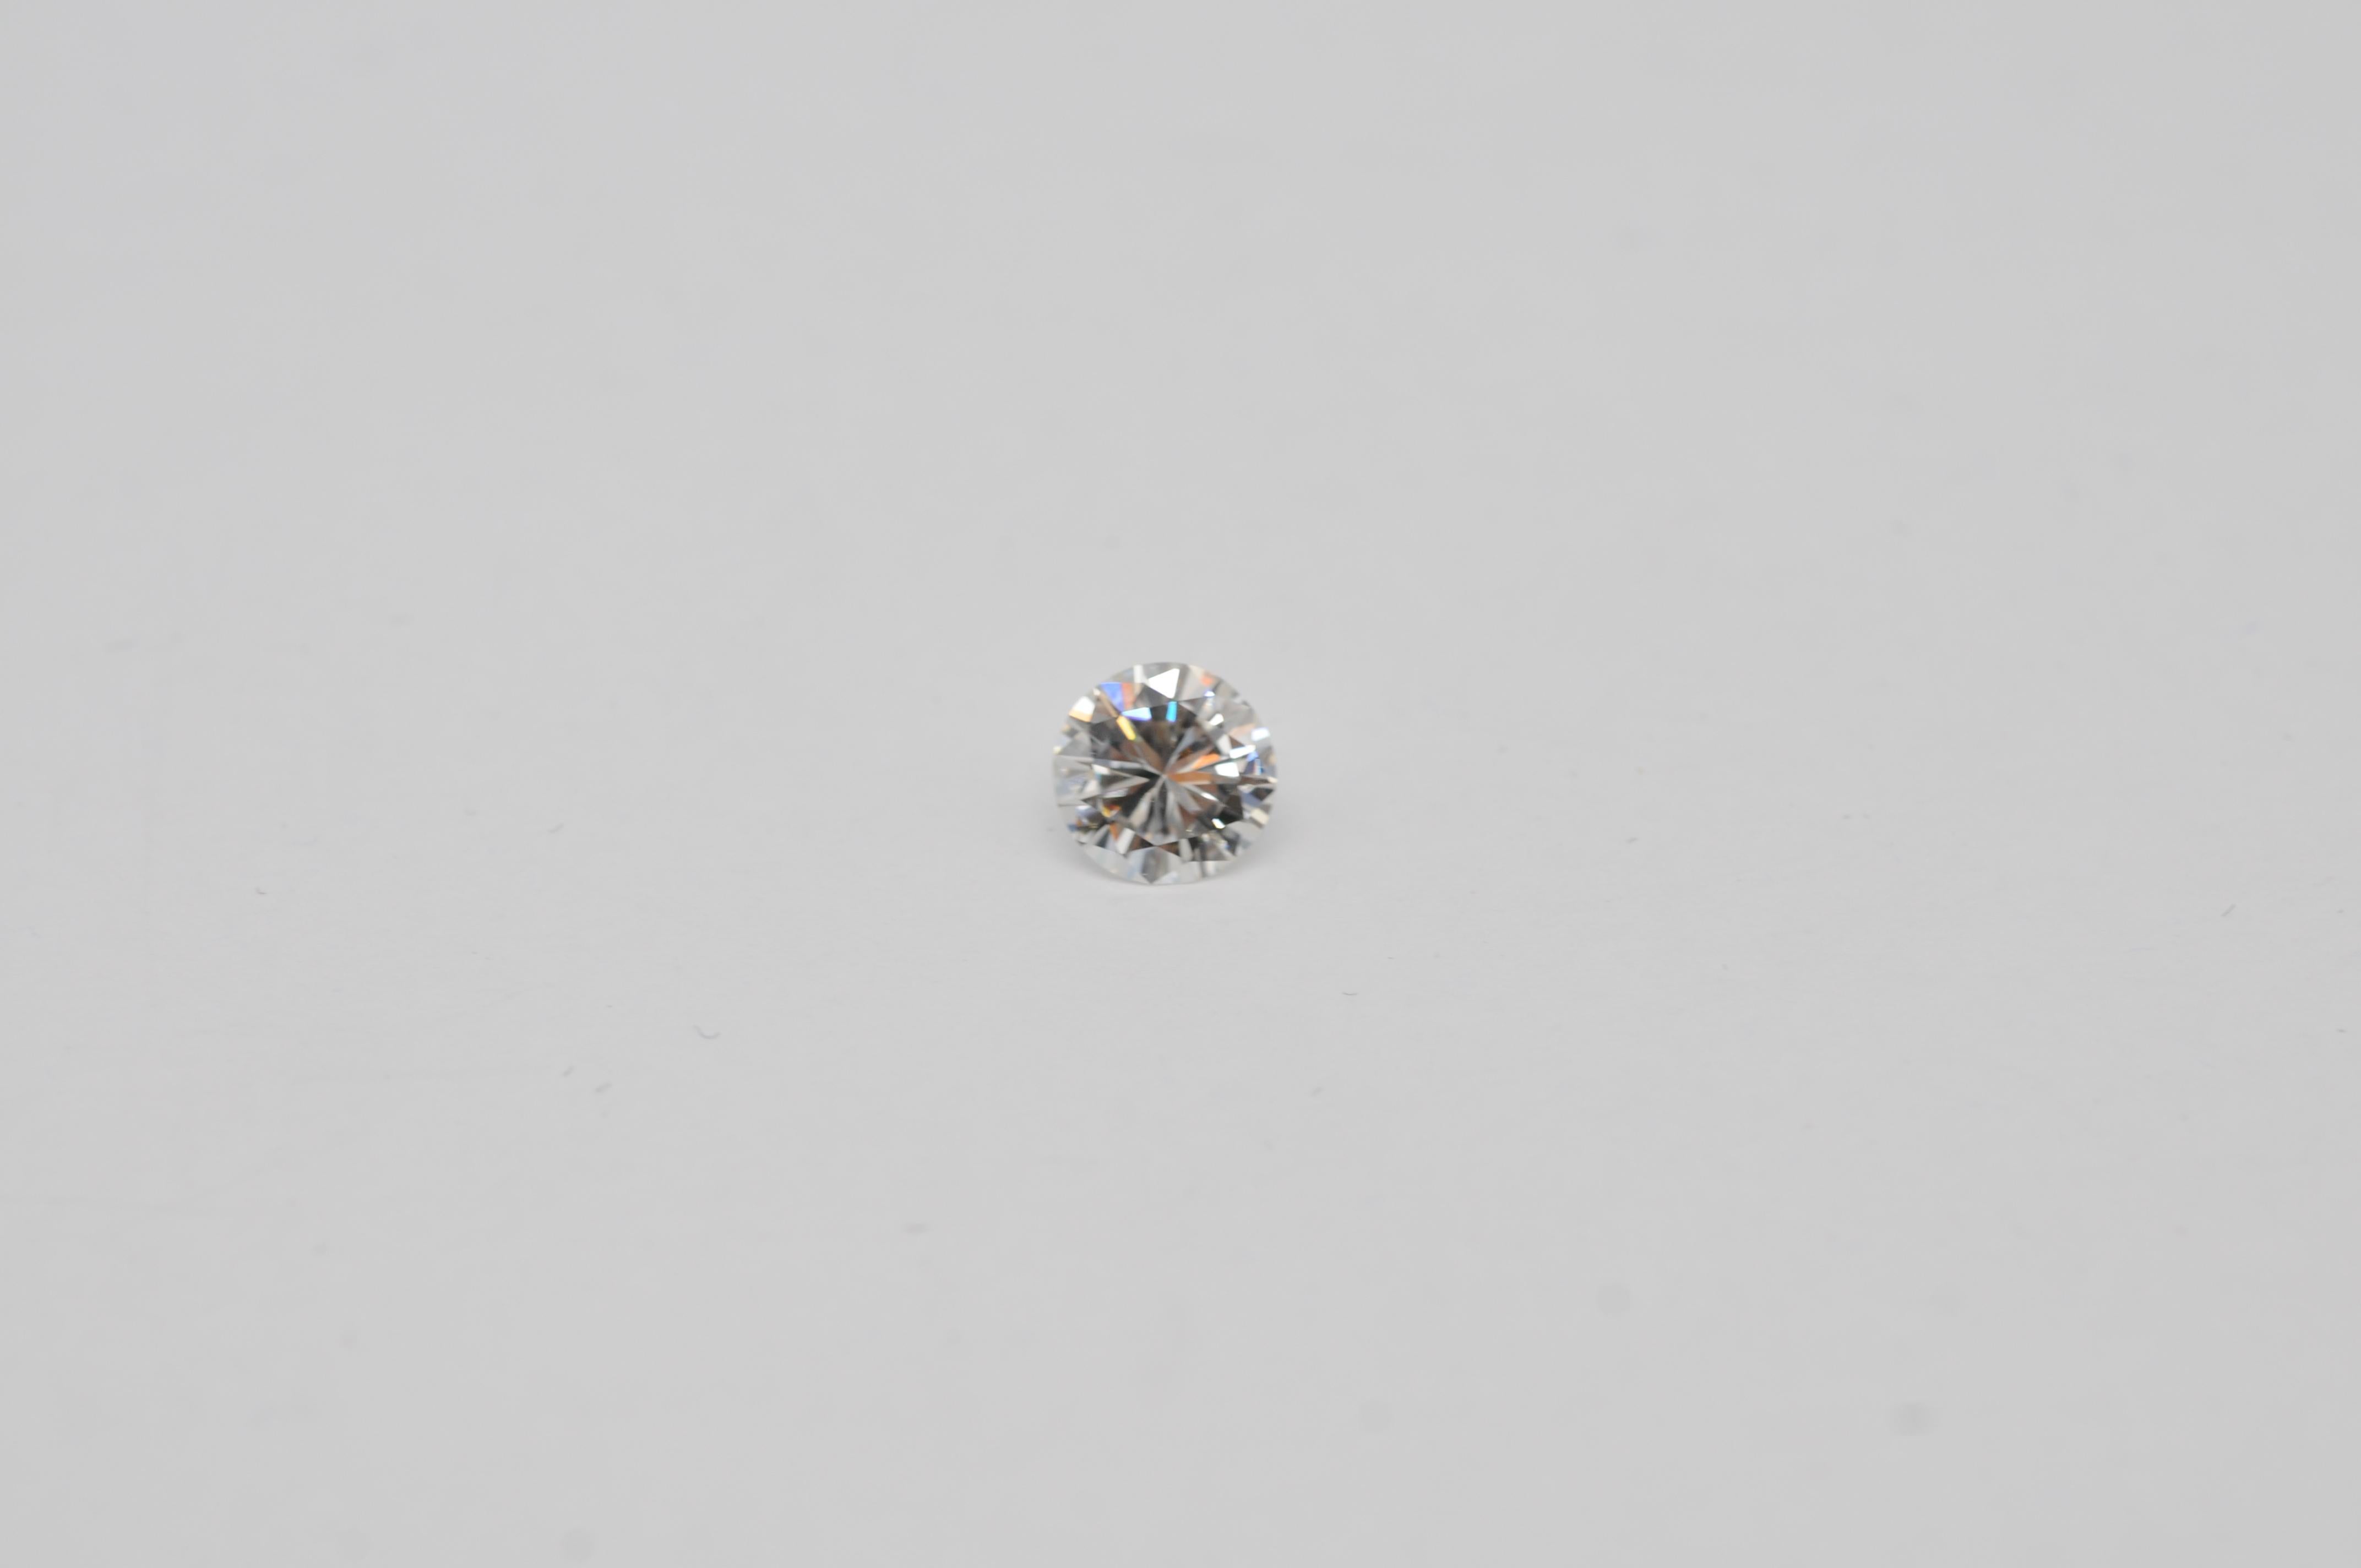  Diamond clarity:(IF) internally flawless color: top wesselton 1.06ct For Sale 1